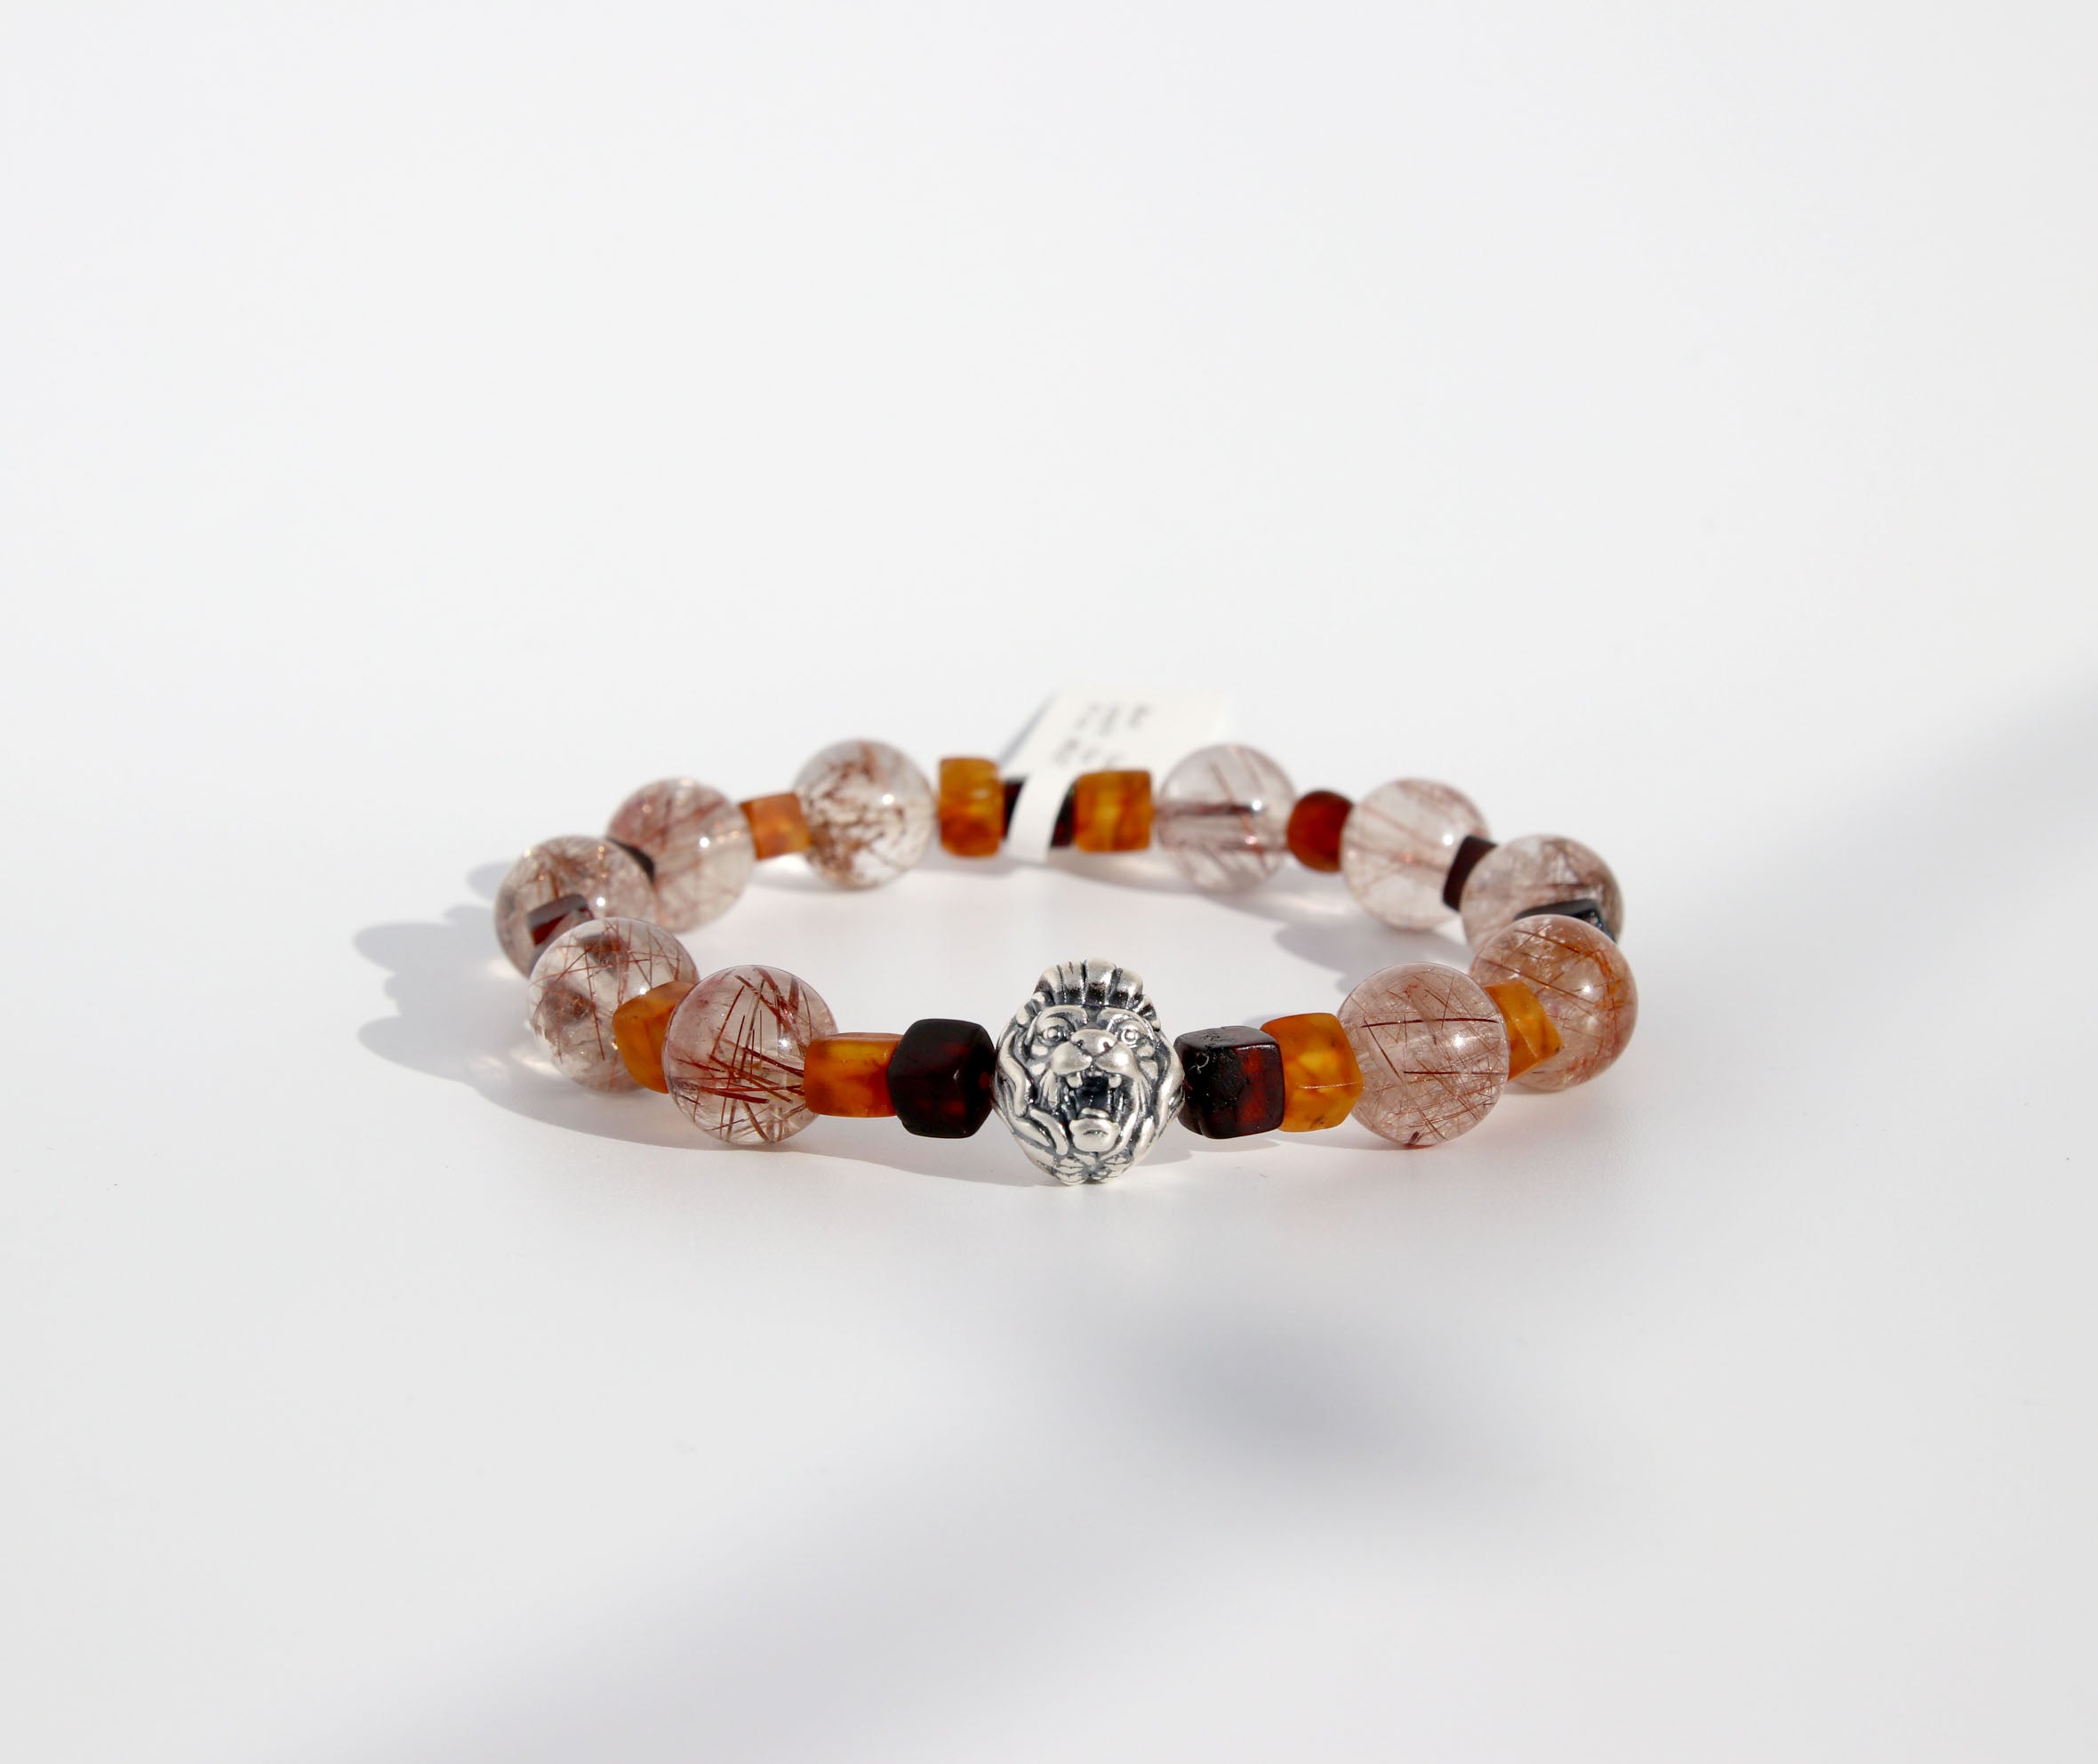 Inner Bliss Healing Crystal Bracelets are designed and crafted in house for enhanced mindfulness. Write us for customization requirements